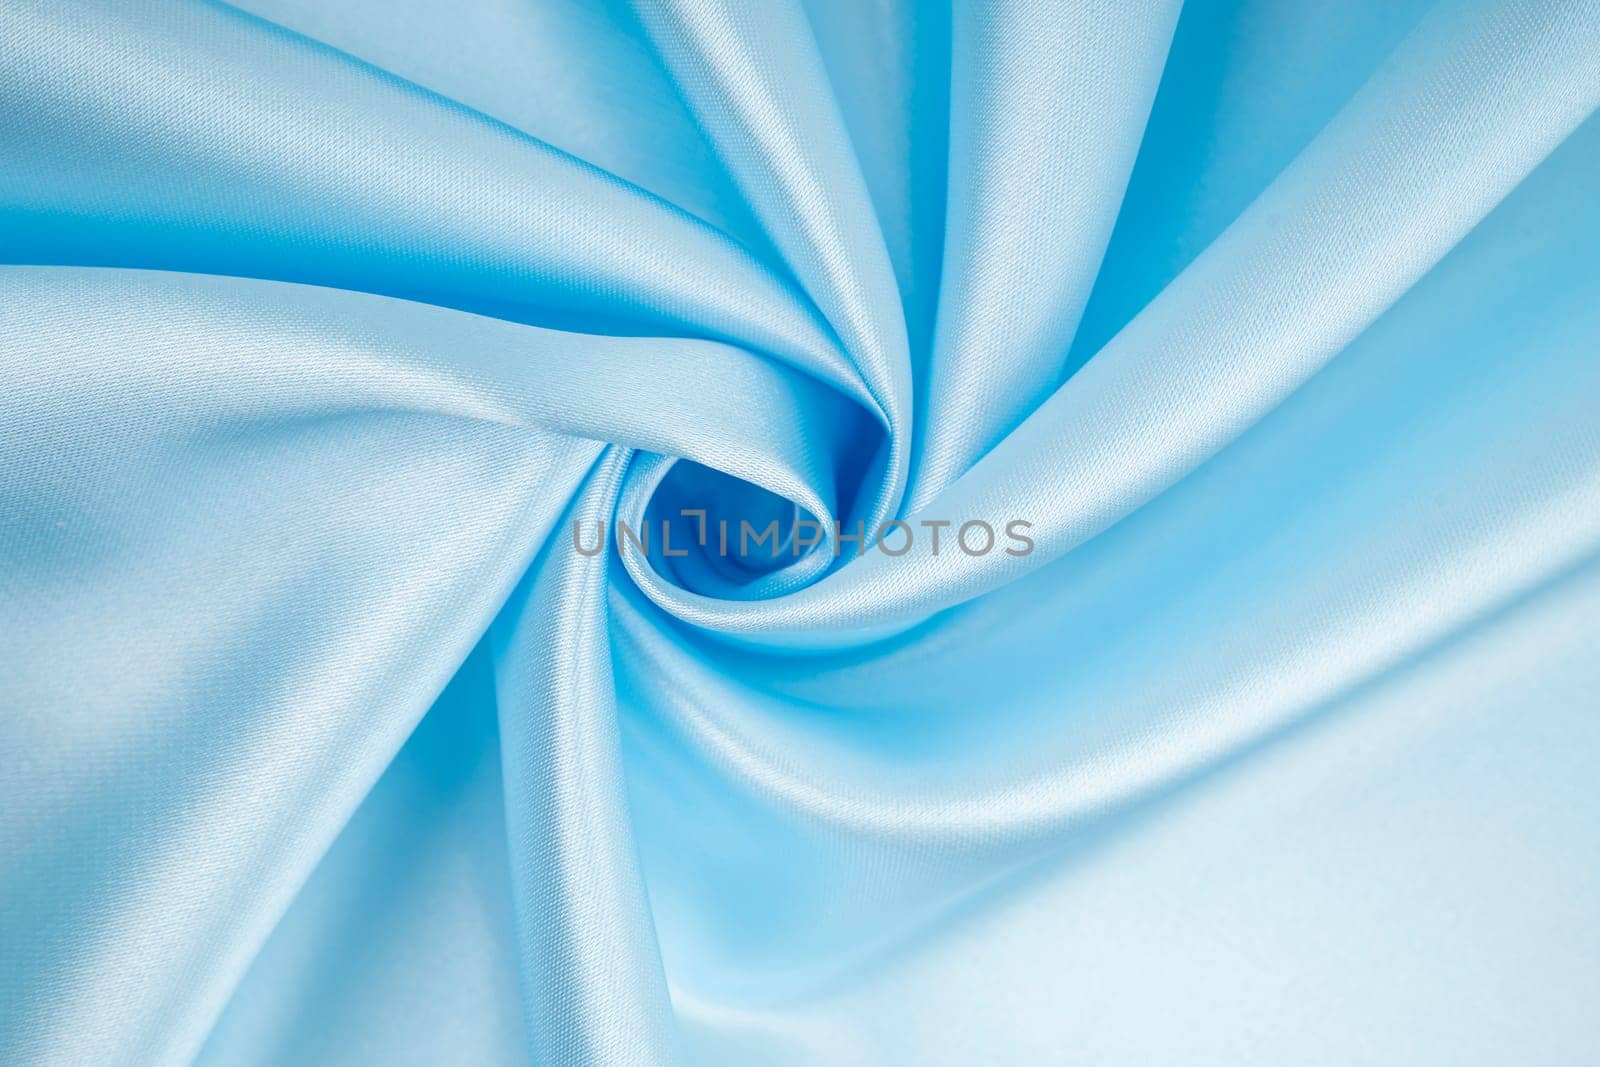 The Soft folds and highlights of light blue silk. Whole background. by Gamjai